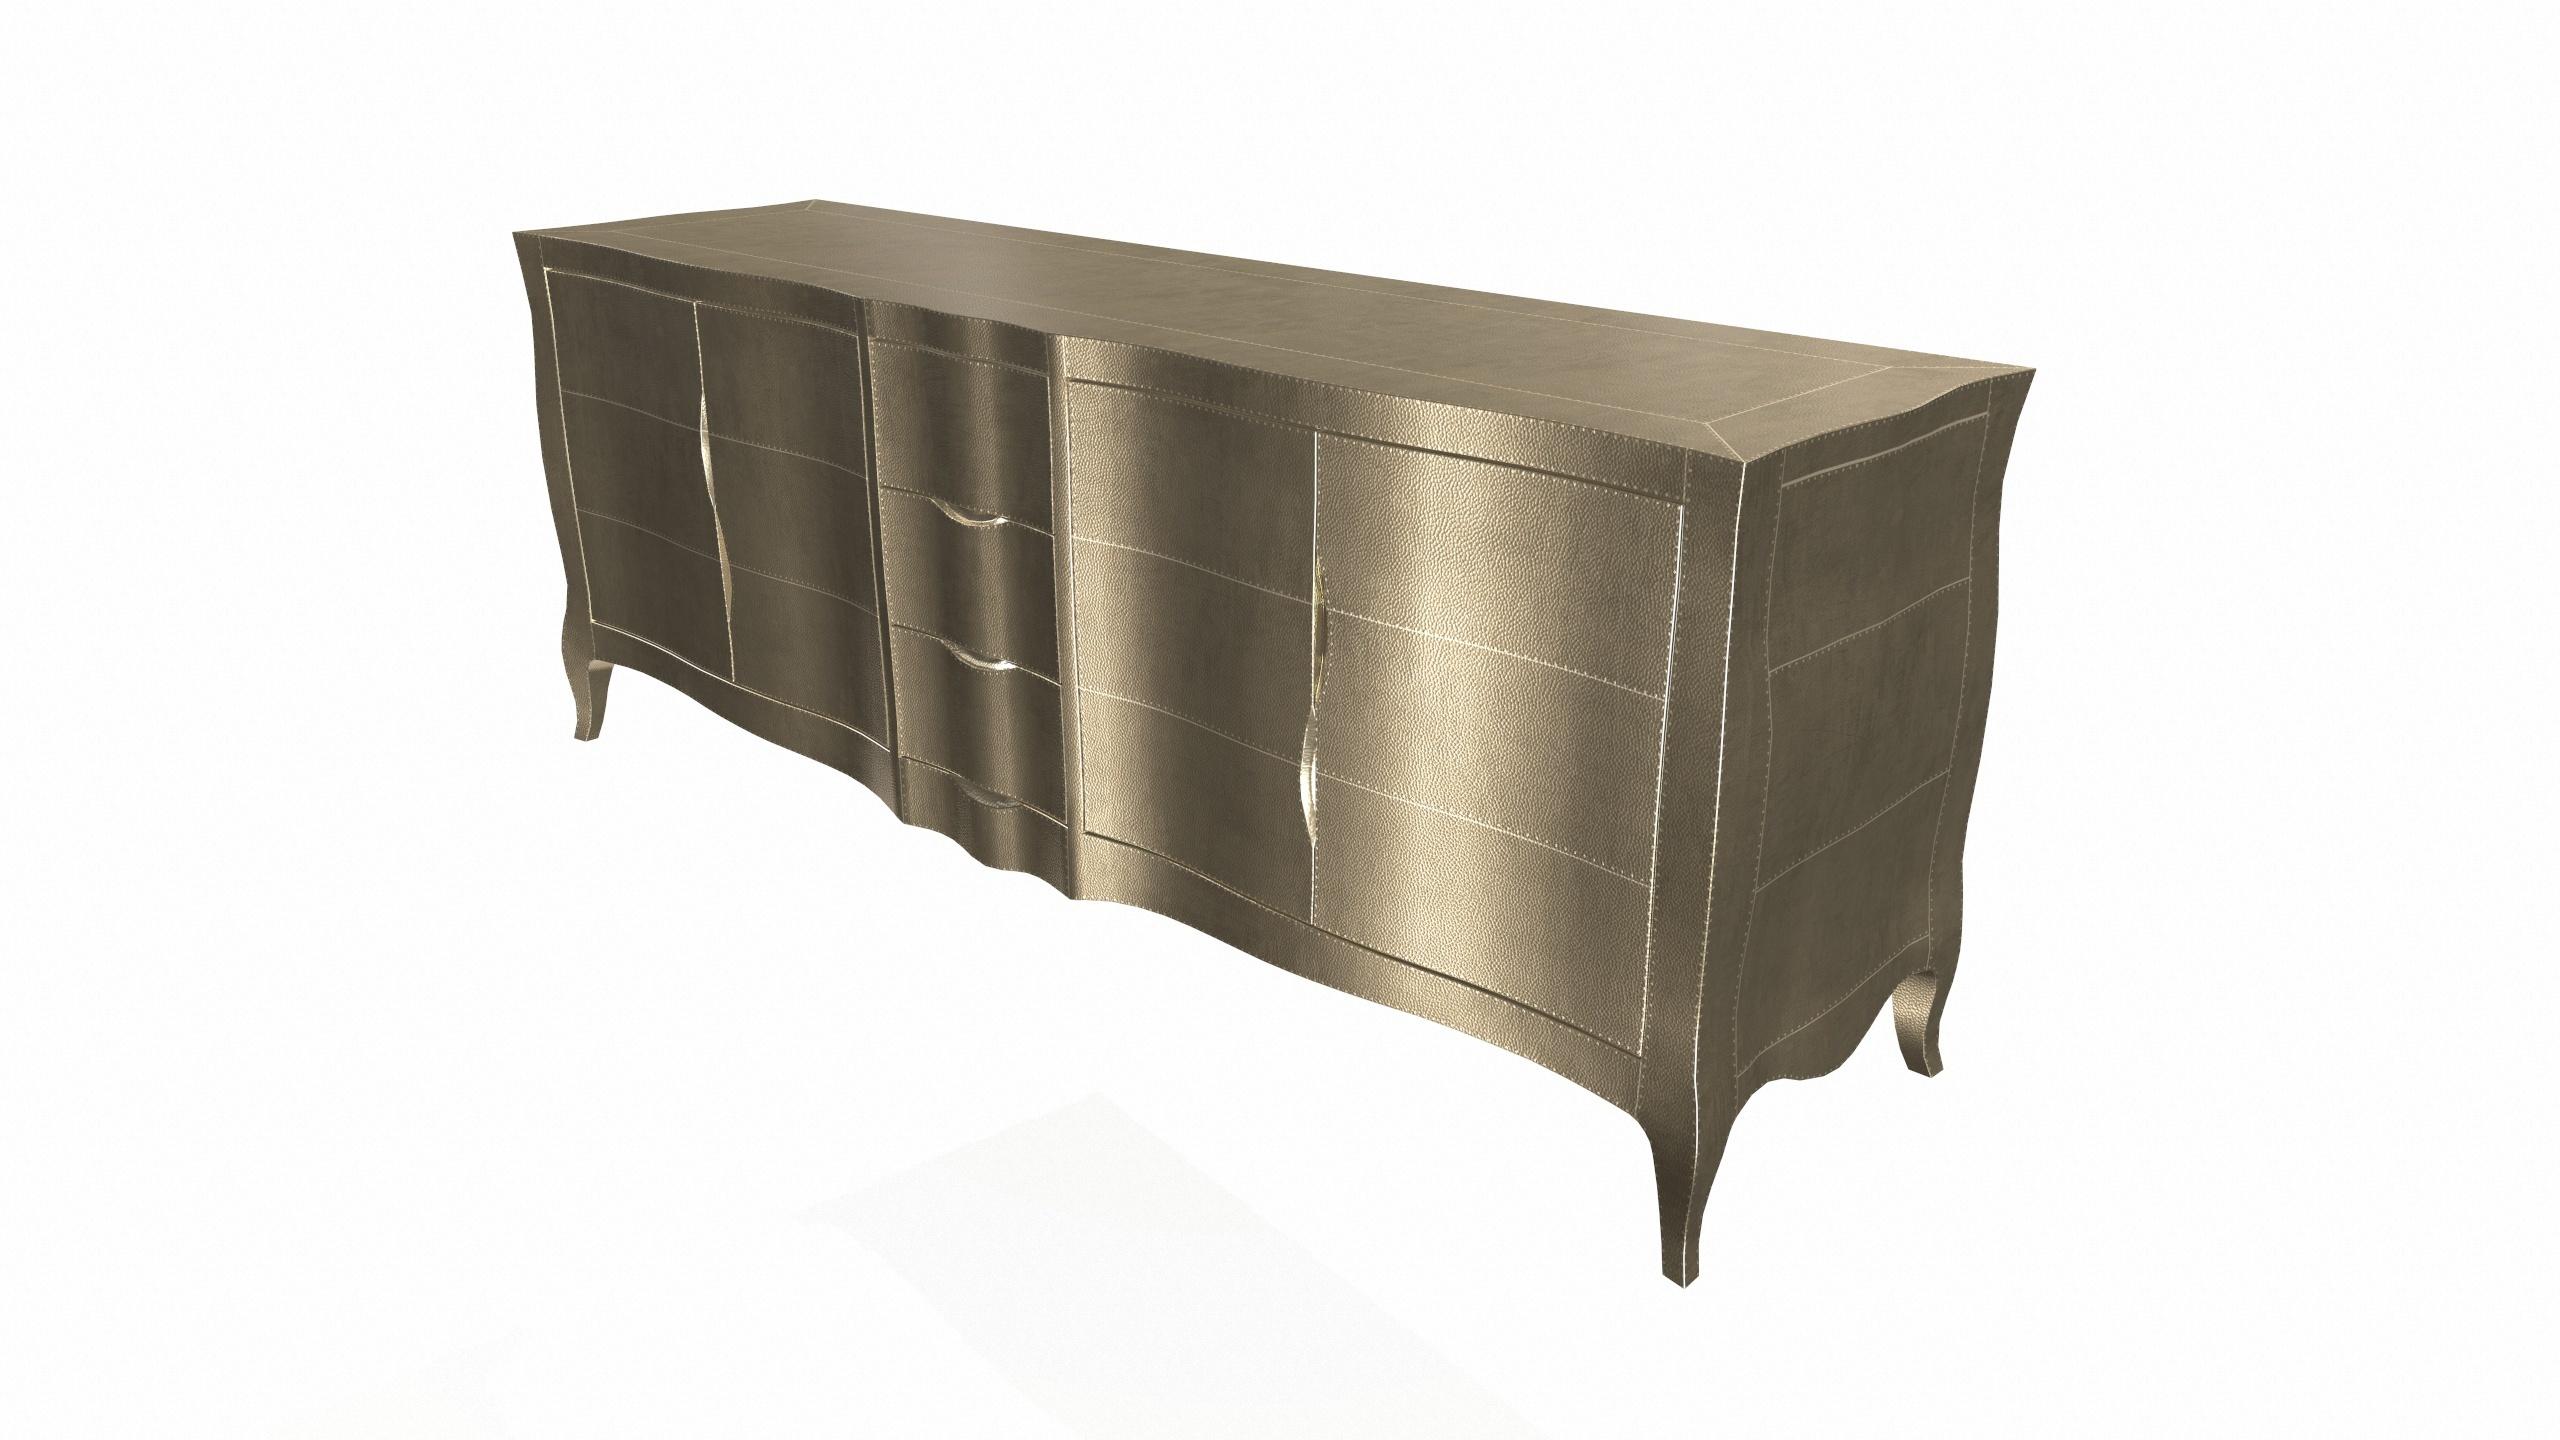 American Louise Credenza Art Deco Bookcases in Mid. Hammered Brass by Paul Mathieu For Sale